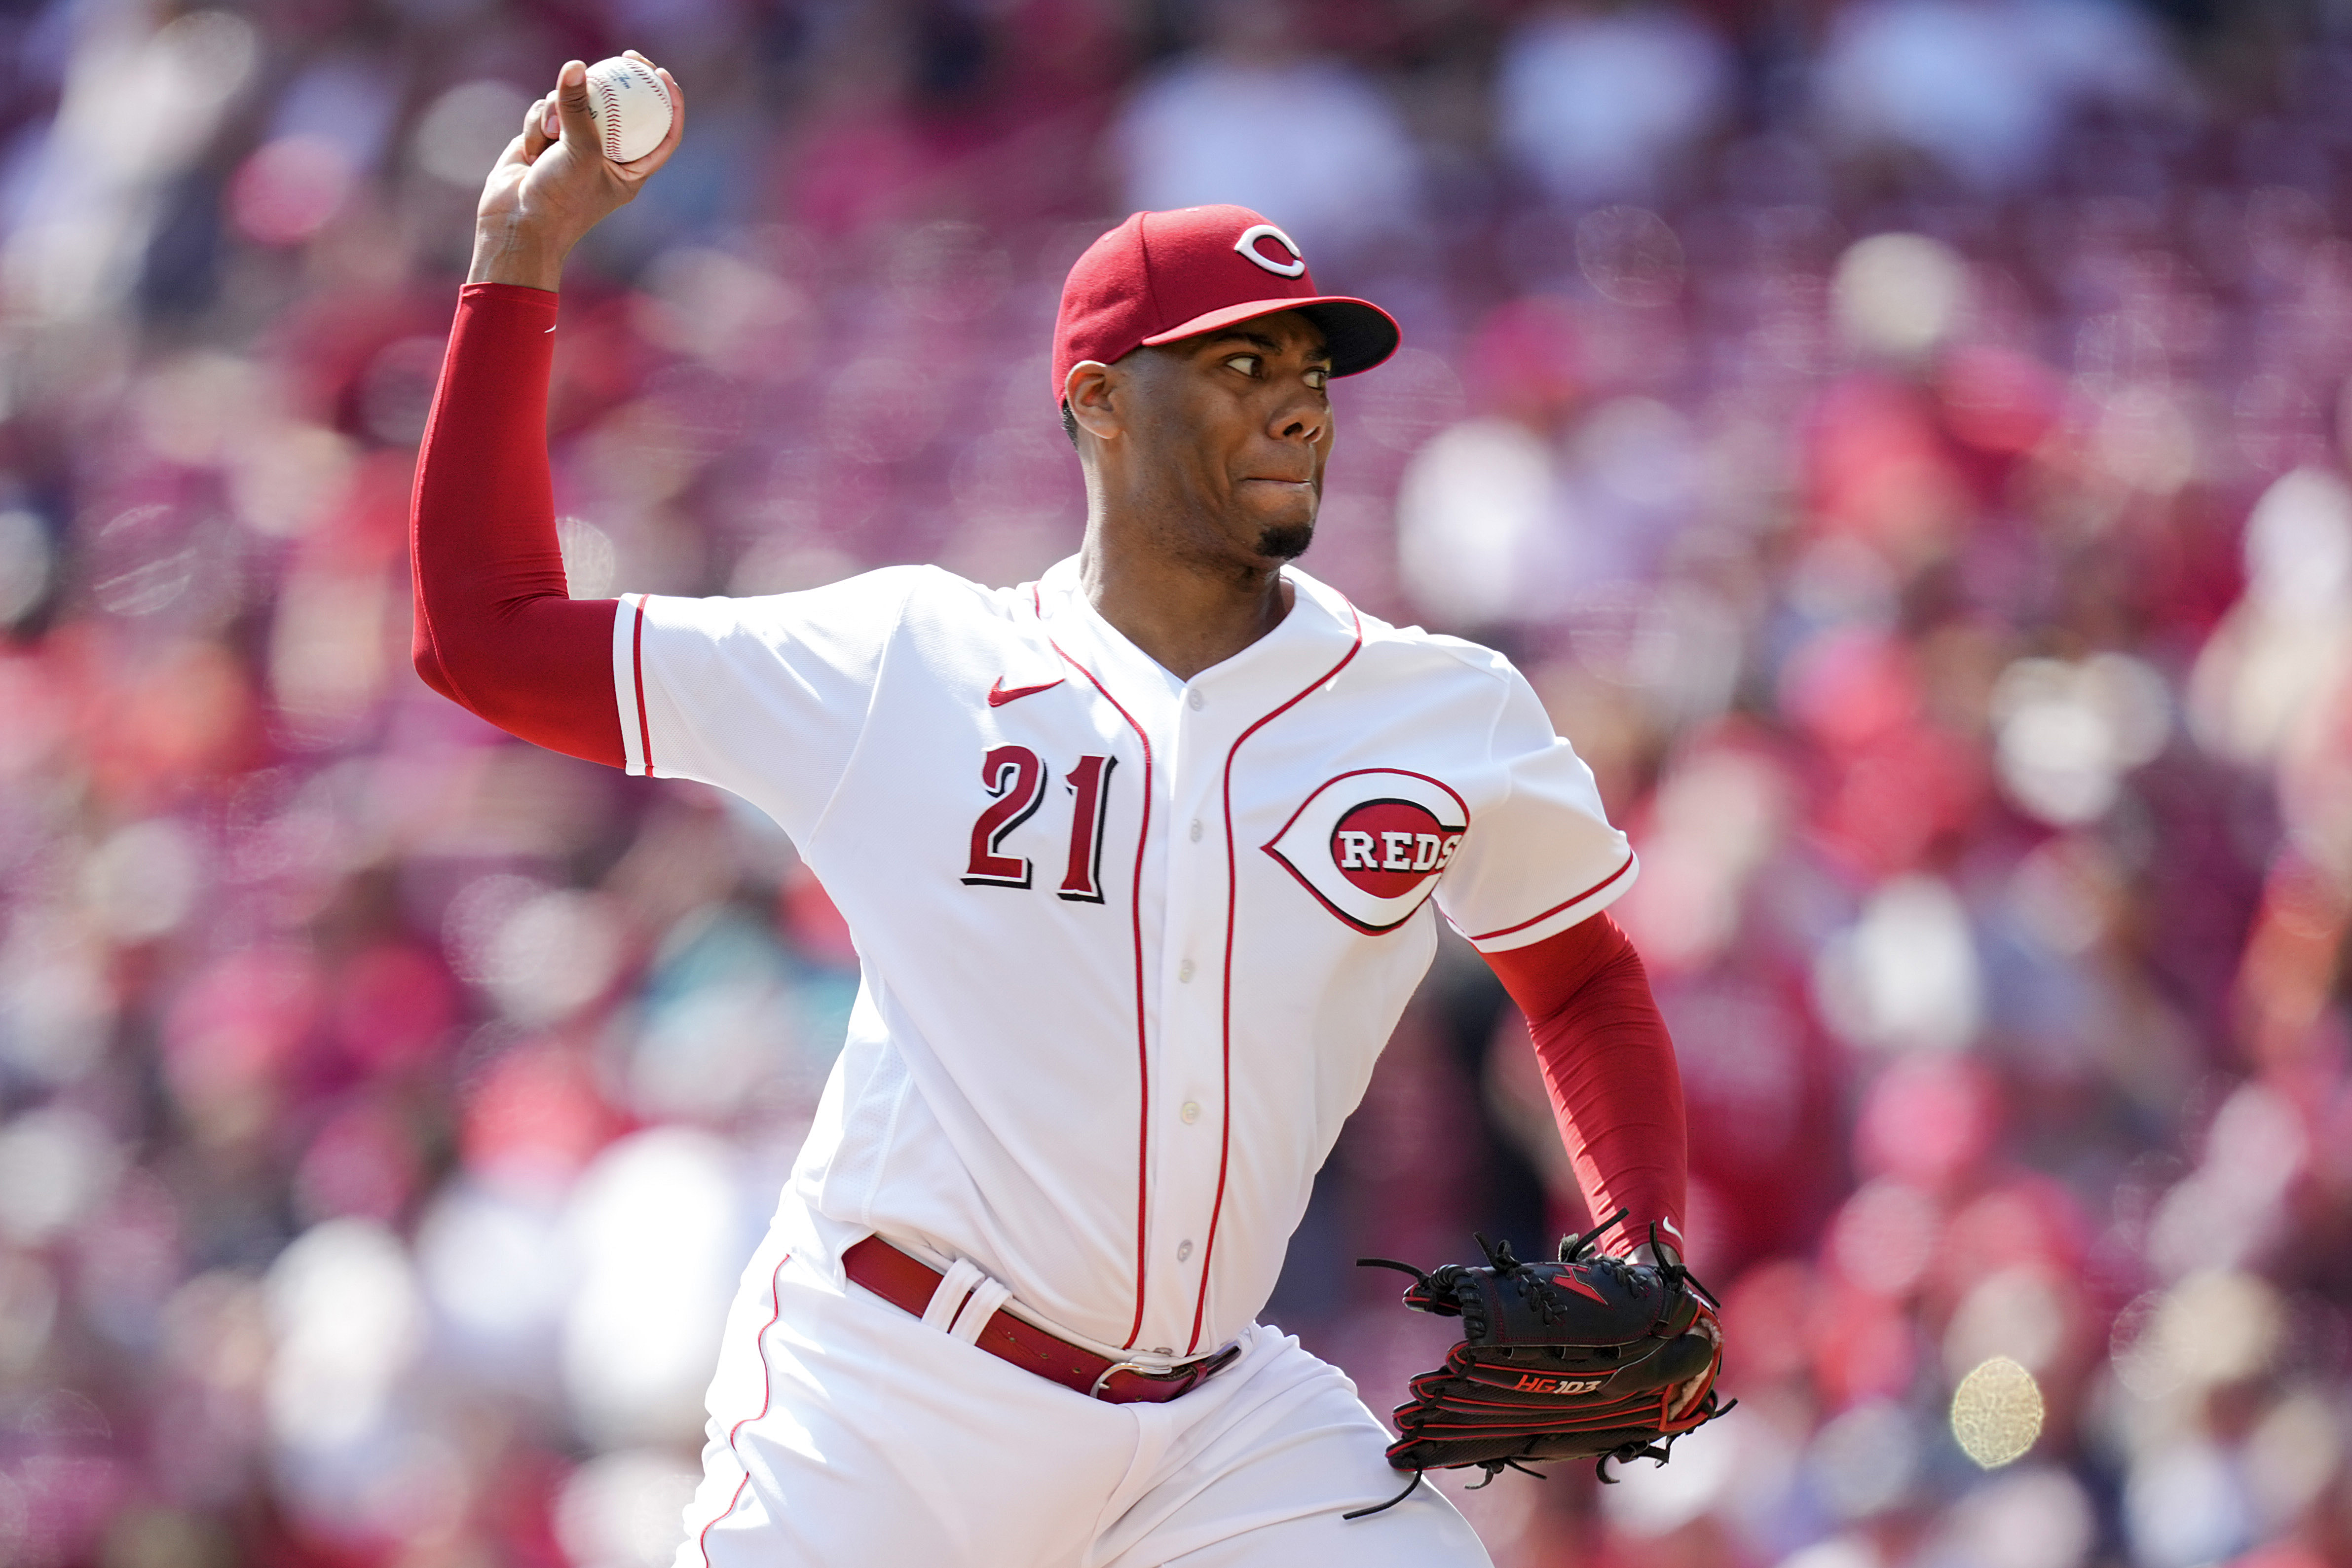 Is it time for the Reds to change their uniforms? Experts weigh in with  suggestions from the past and future - The Athletic